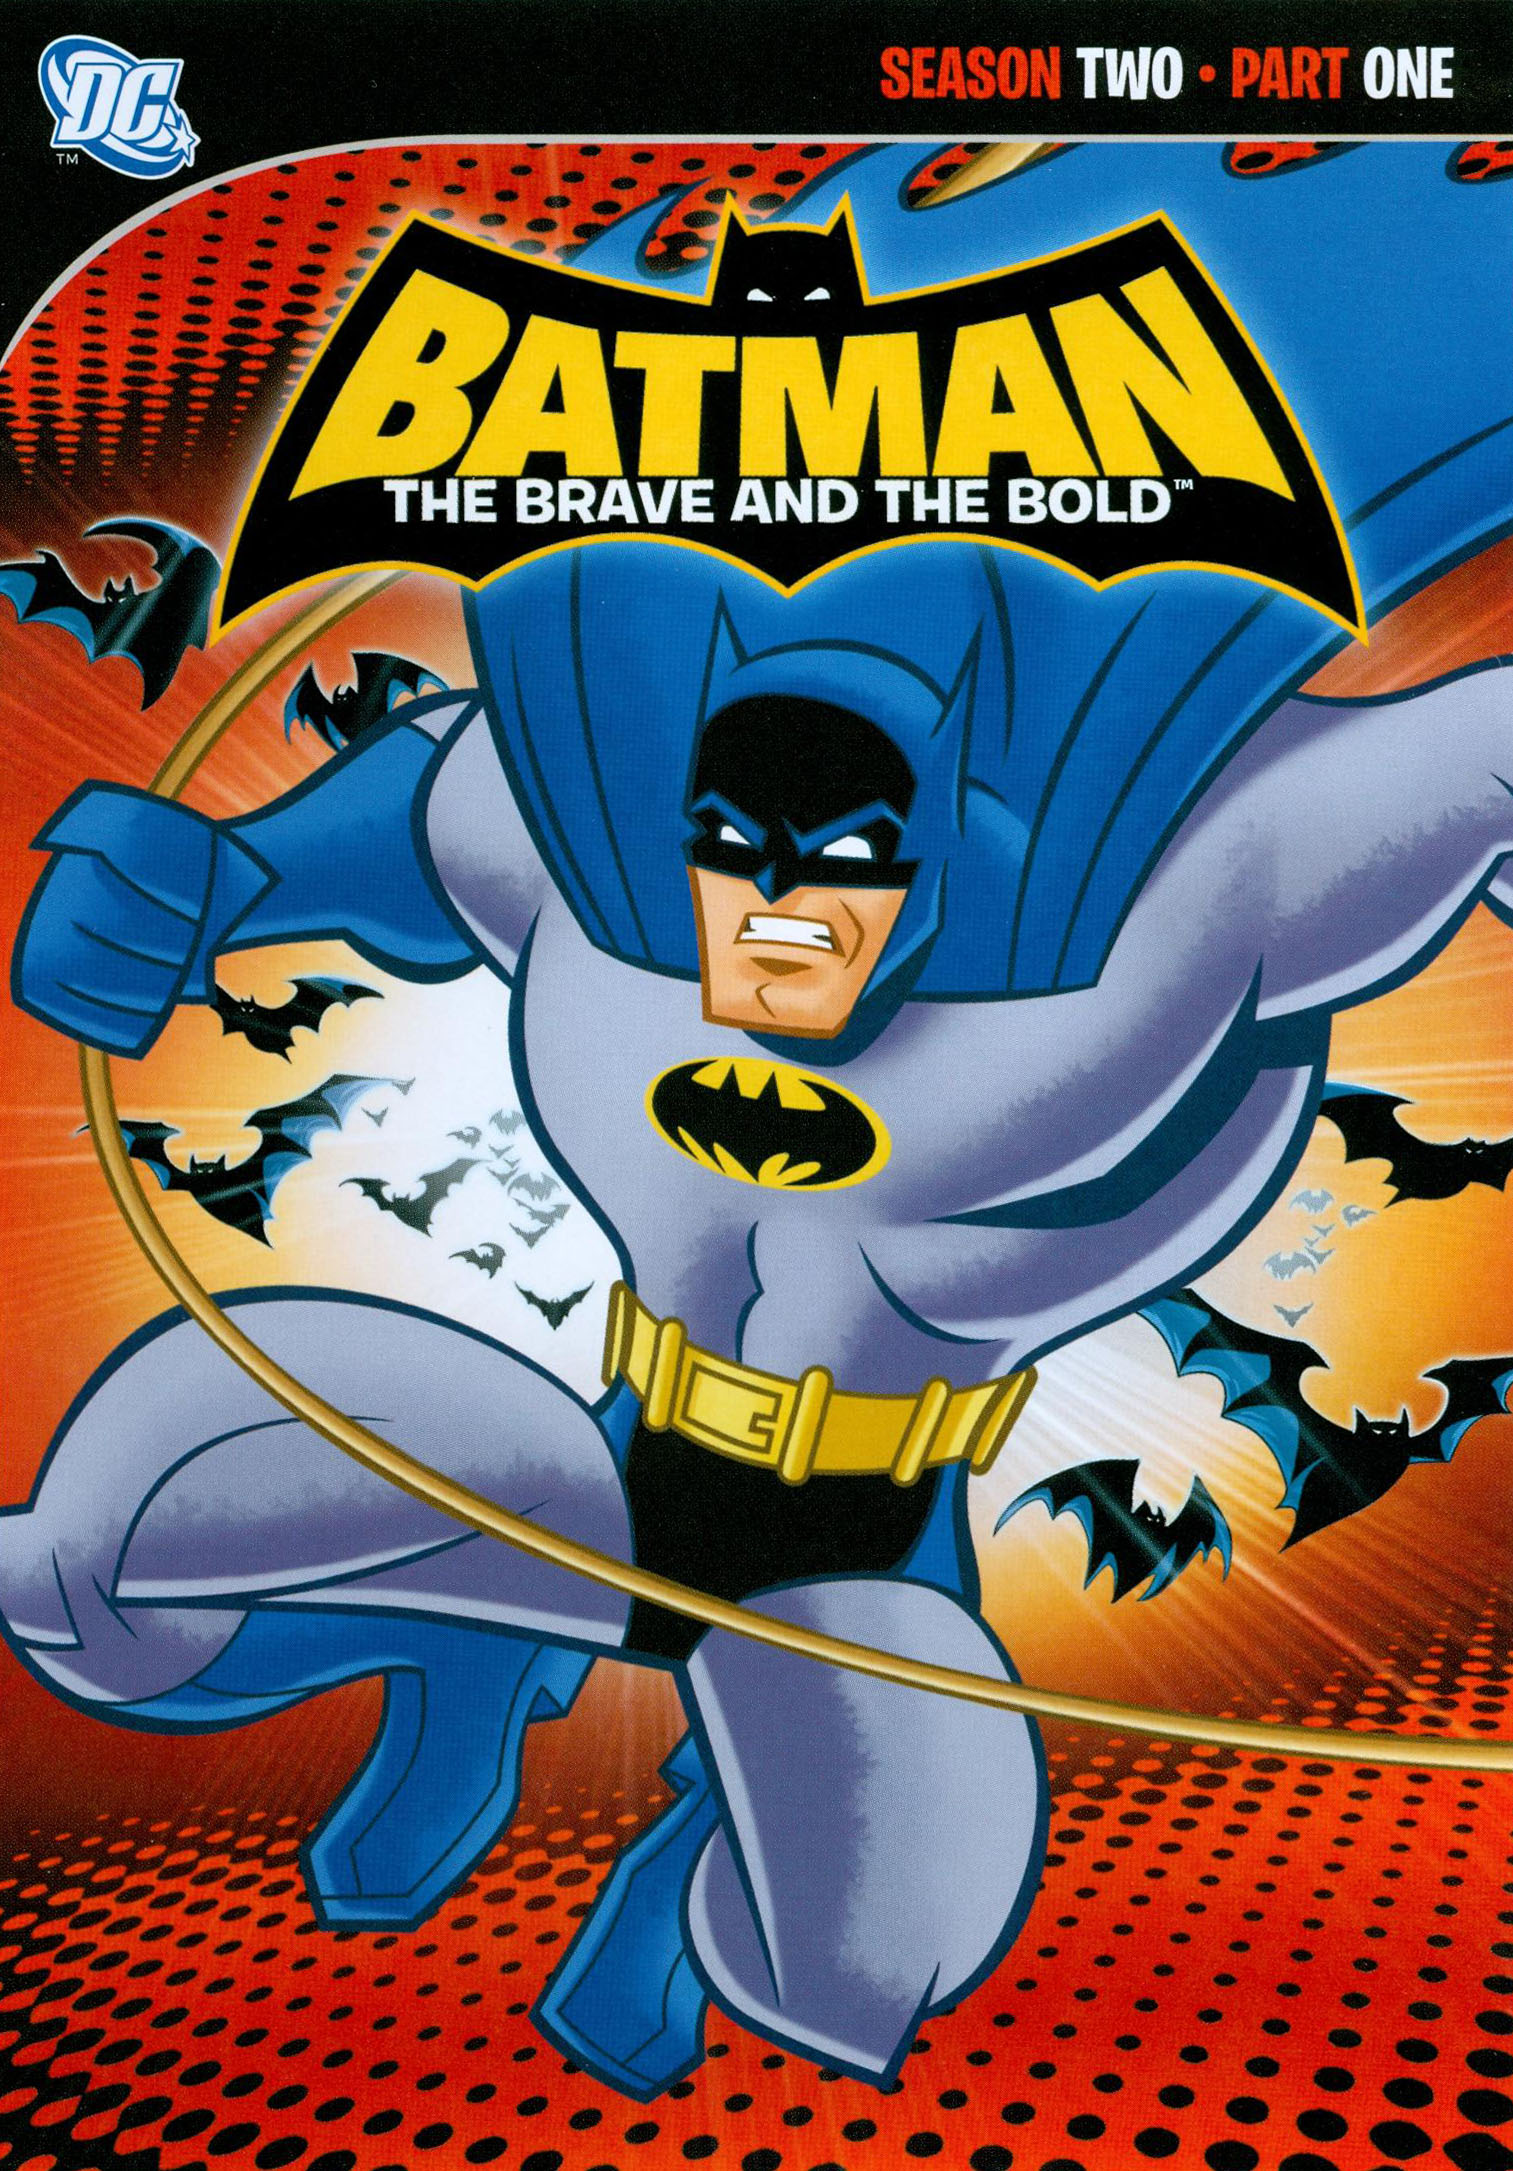 Batman: The Brave and the Bold Season Two, Part One [2 Discs] - Best Buy